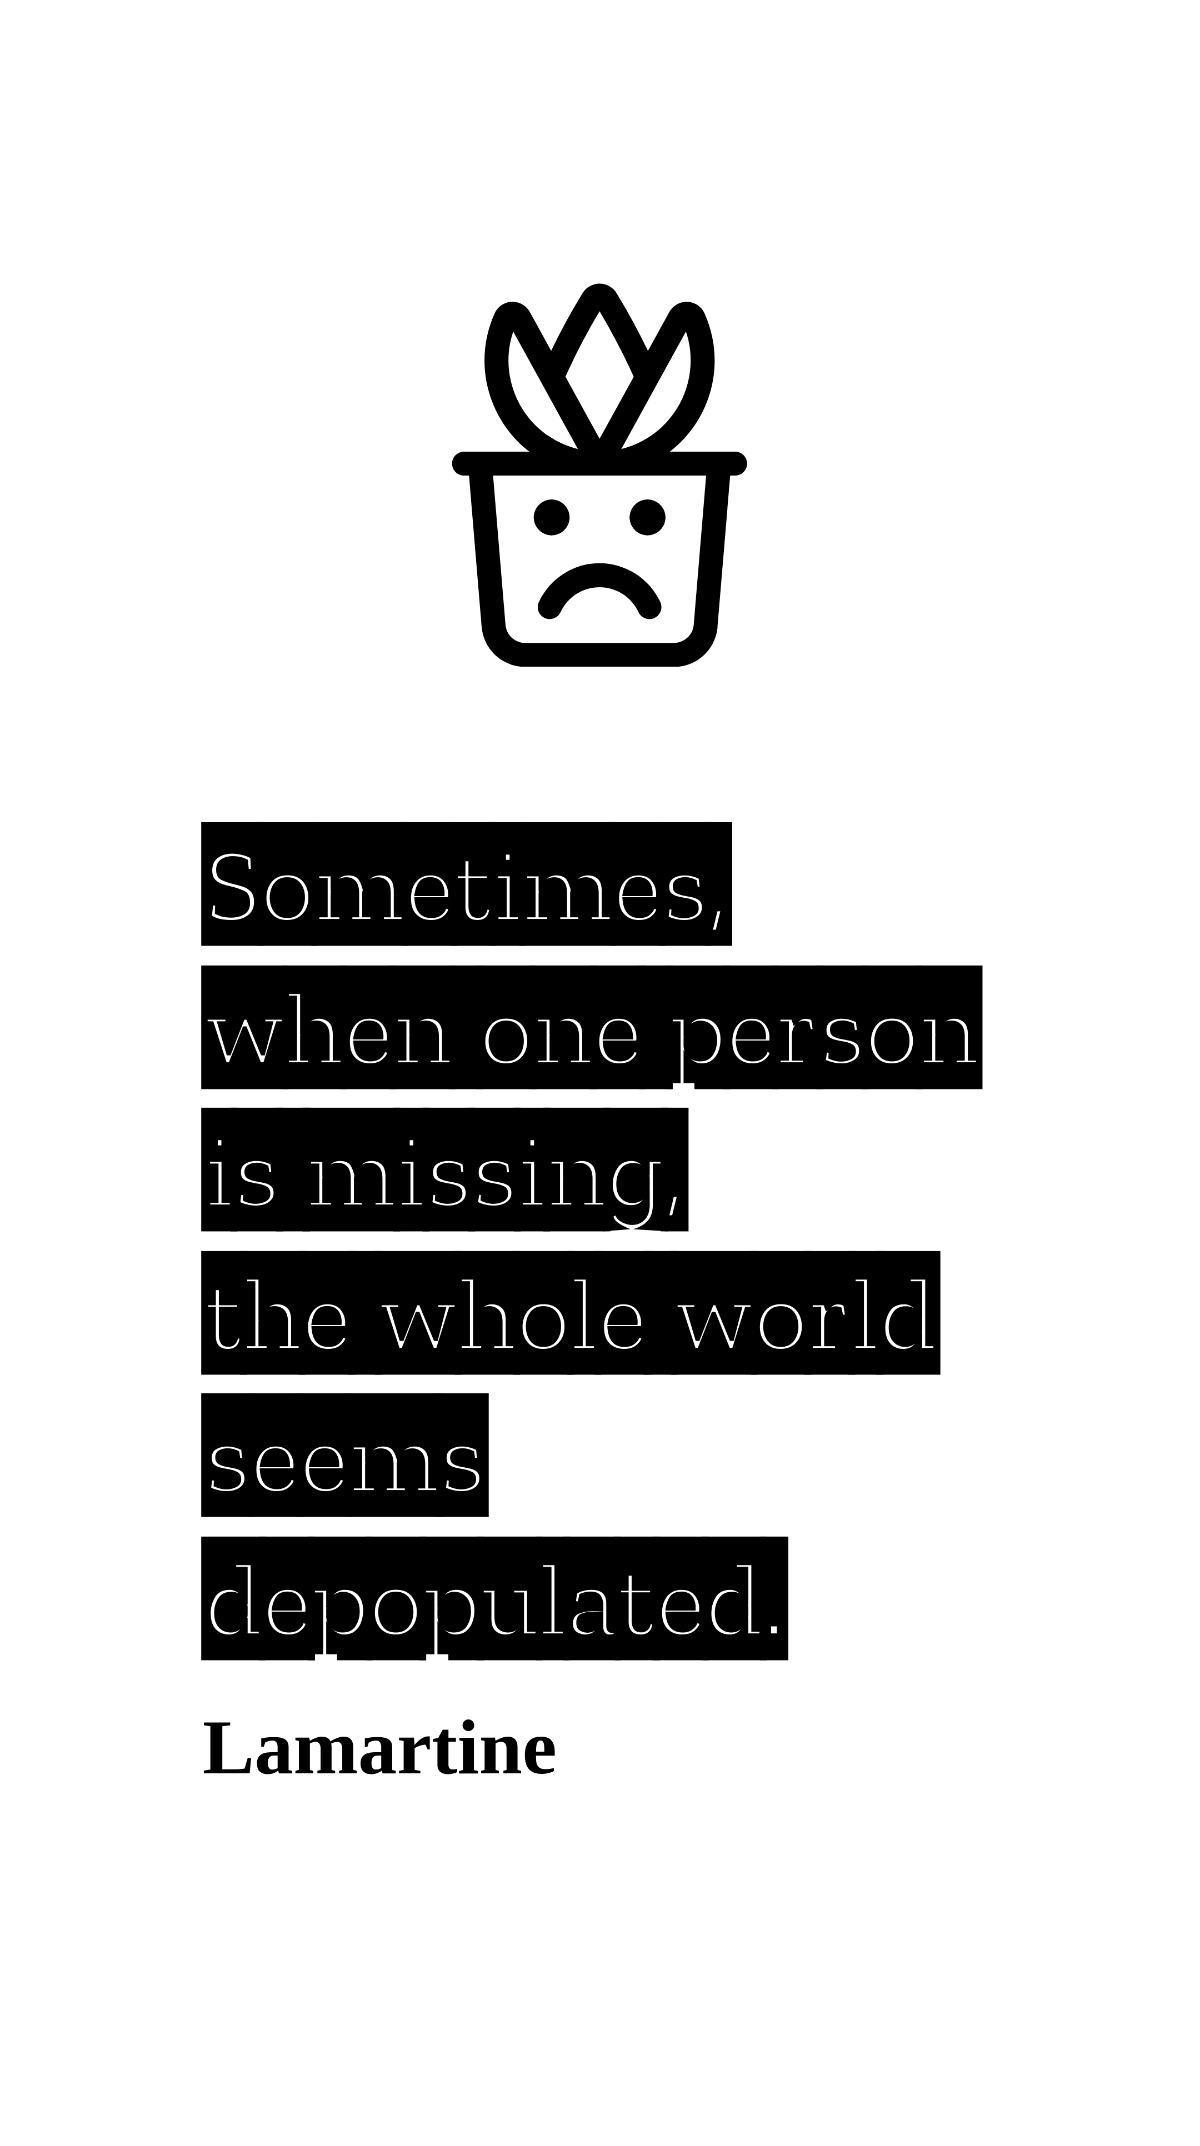 Lamartine - Sometimes, when one person is missing, the whole world seems depopulated. Template